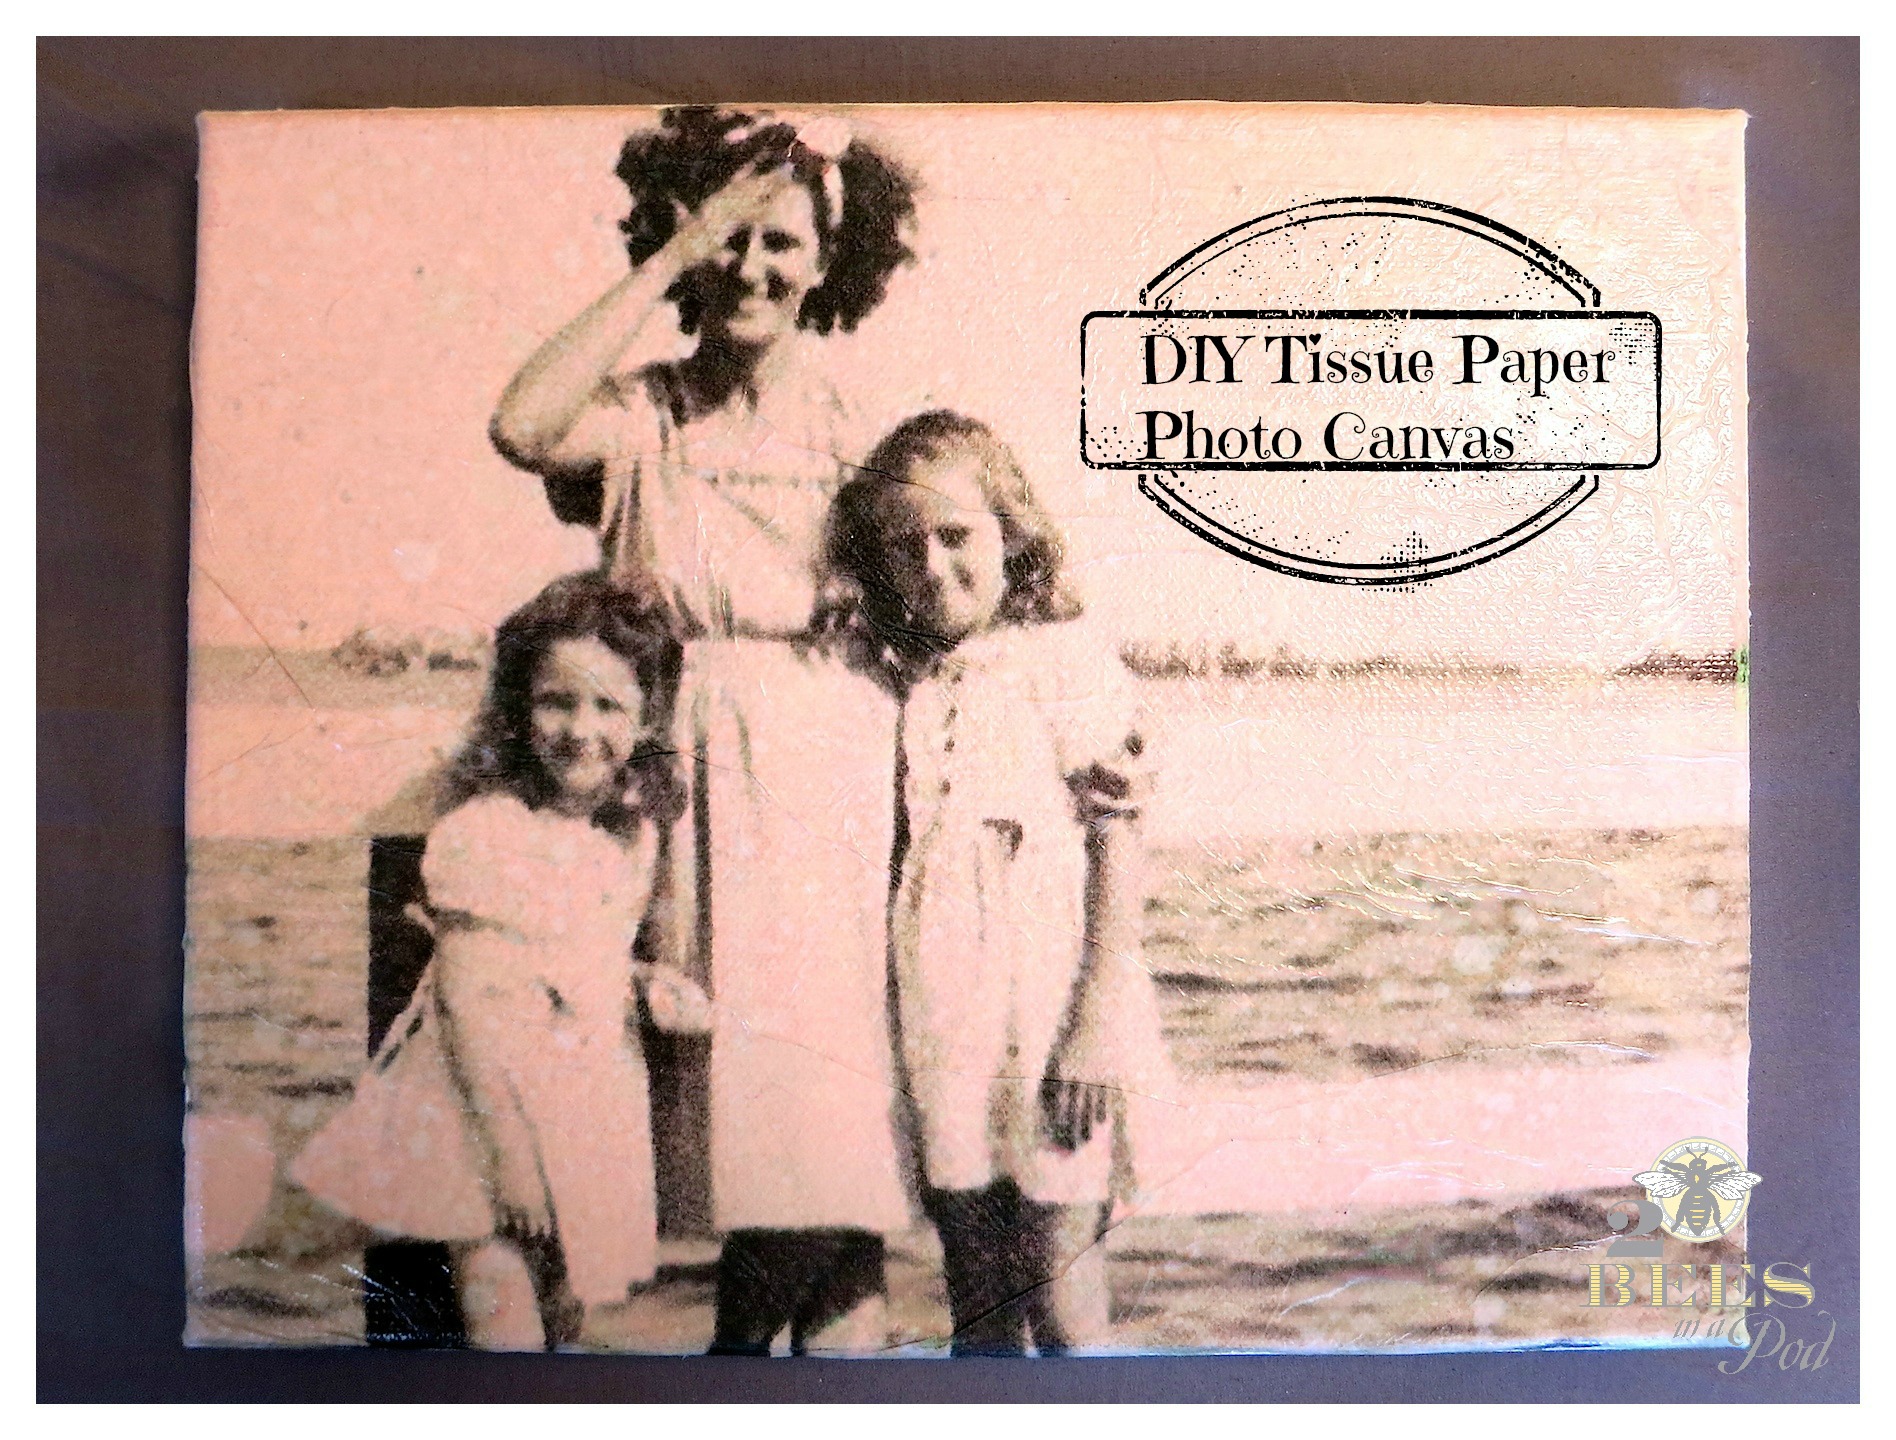 DIY Tissue Paper Photo Canvas - print out a photo from your home computer onto gift wrap tissue paper. Using Mod Podge add tissue paper to canvas.